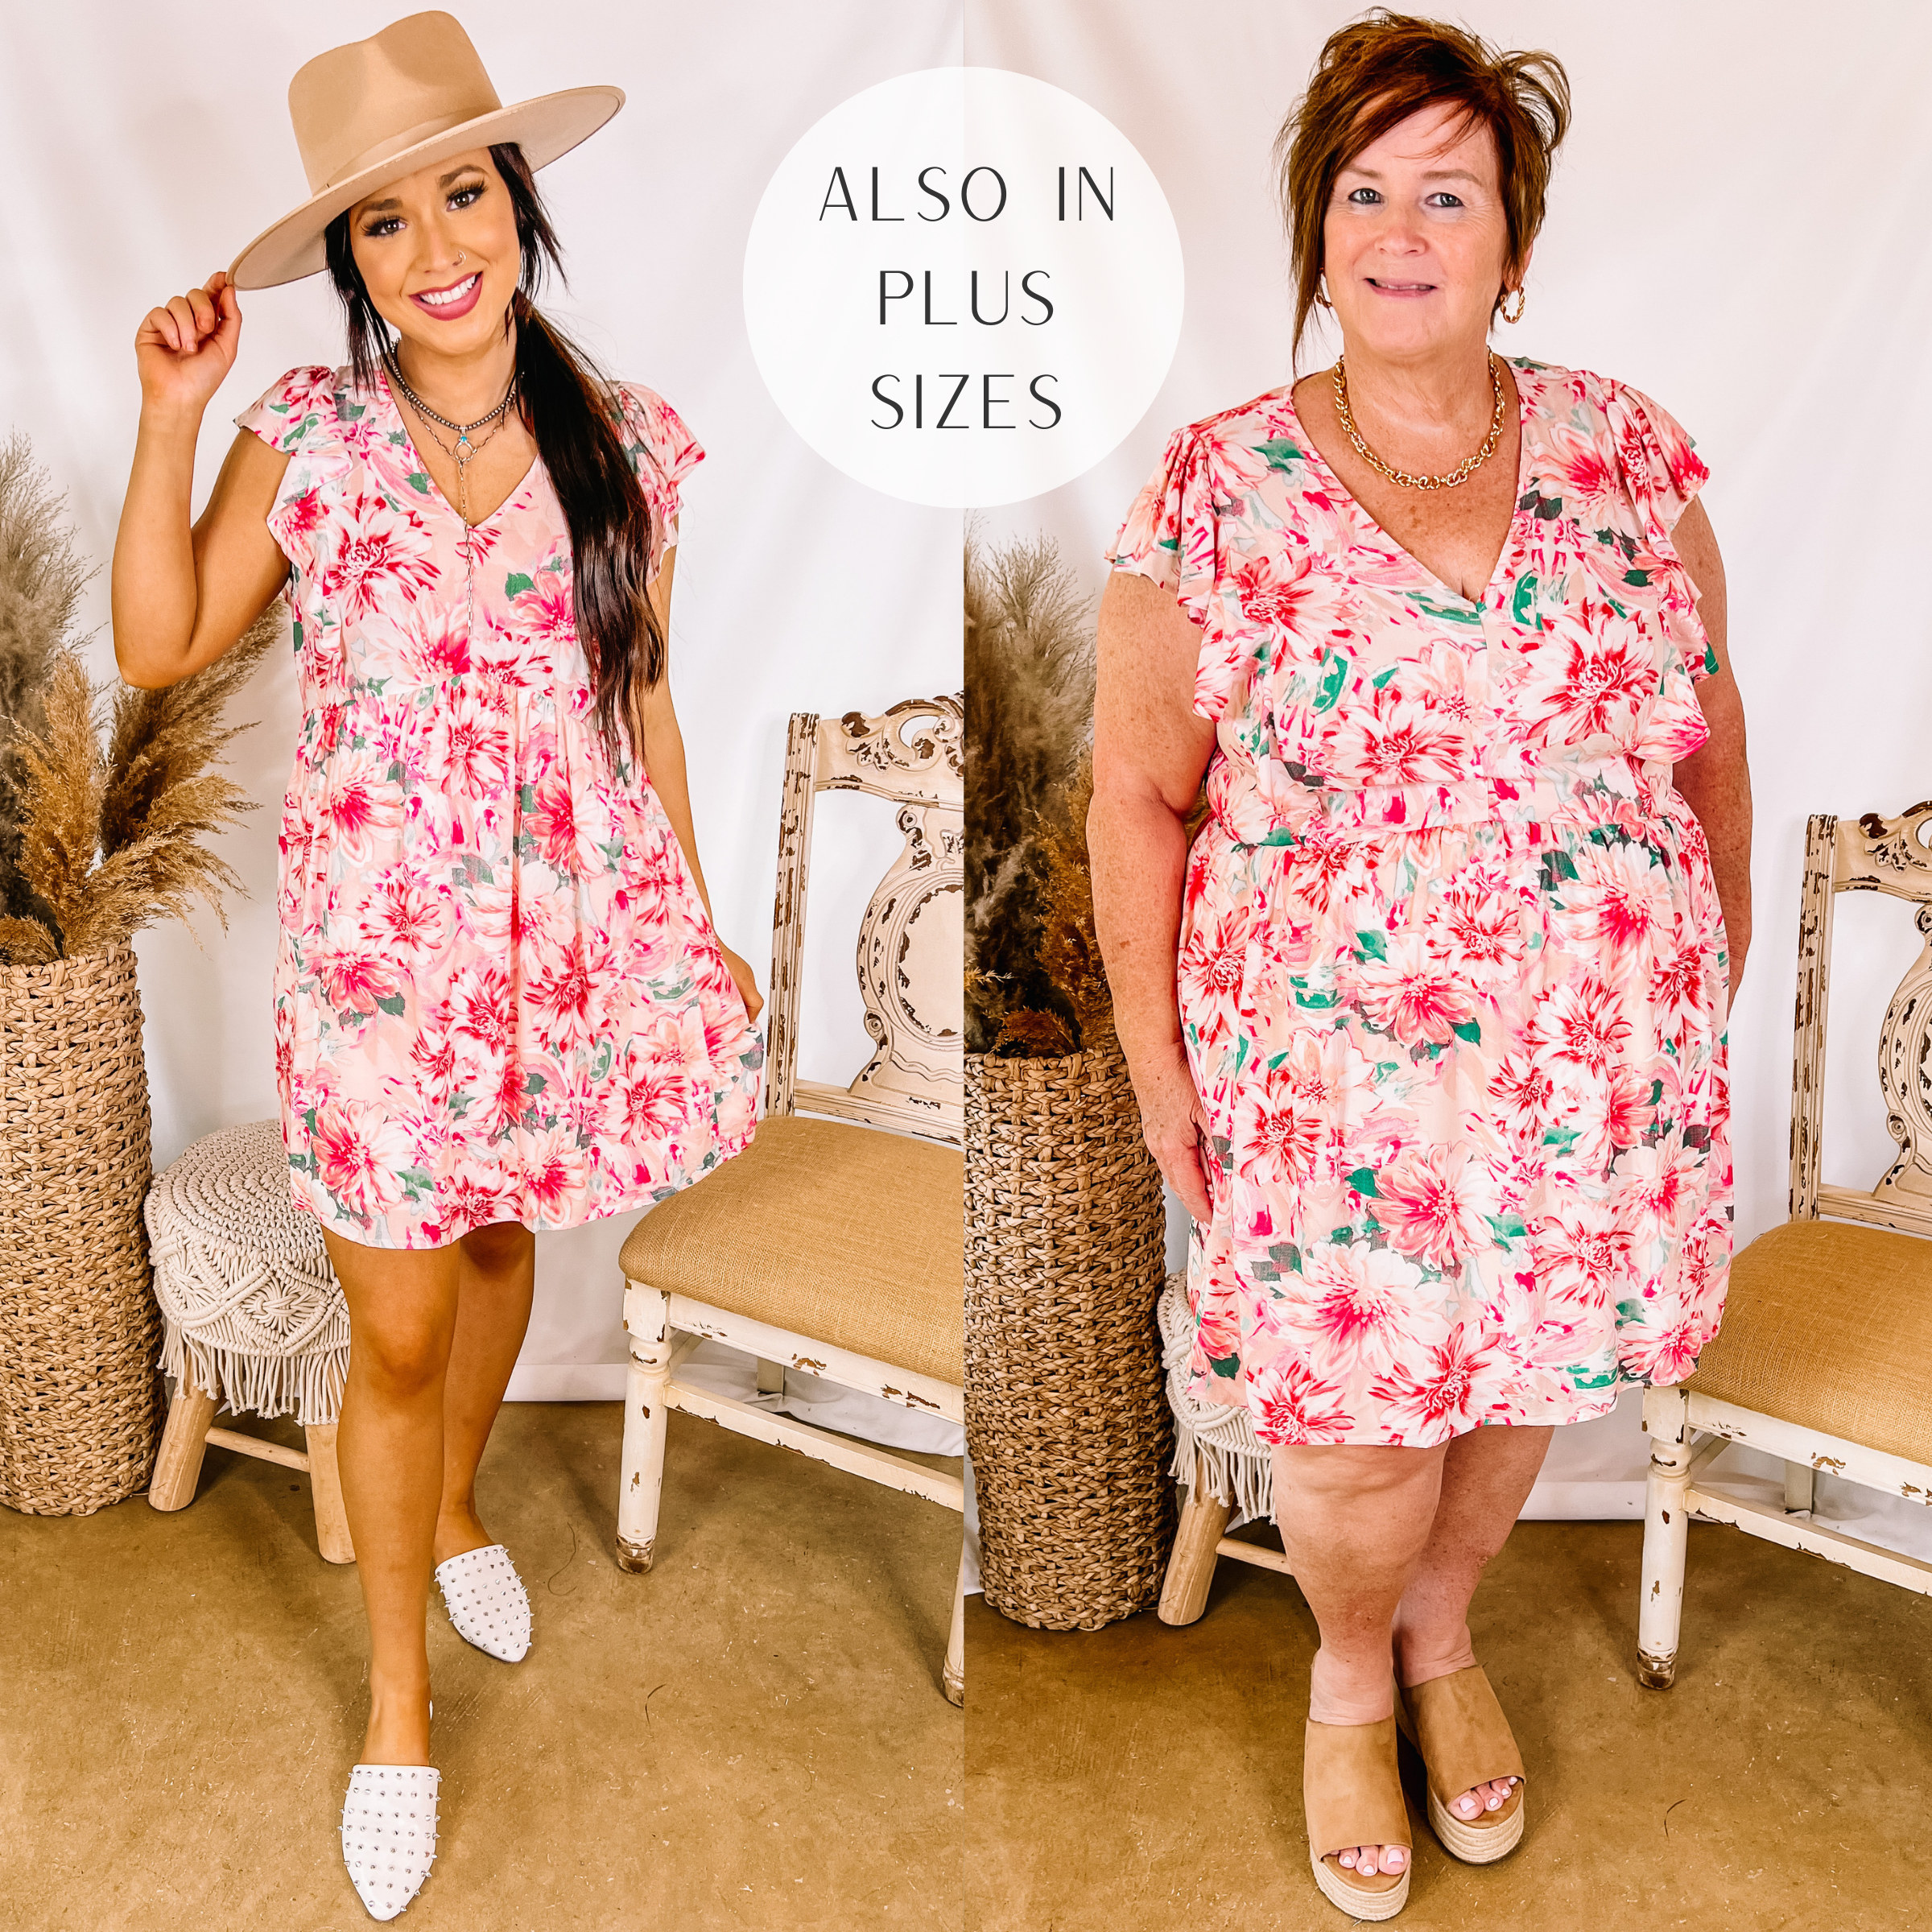 Models are wearing a blush pink floral dress with ruffle cap sleeves. Size small model has it paired with white mules and a tan hat. Plus size model has it paired with tan wedges and gold jewelry.